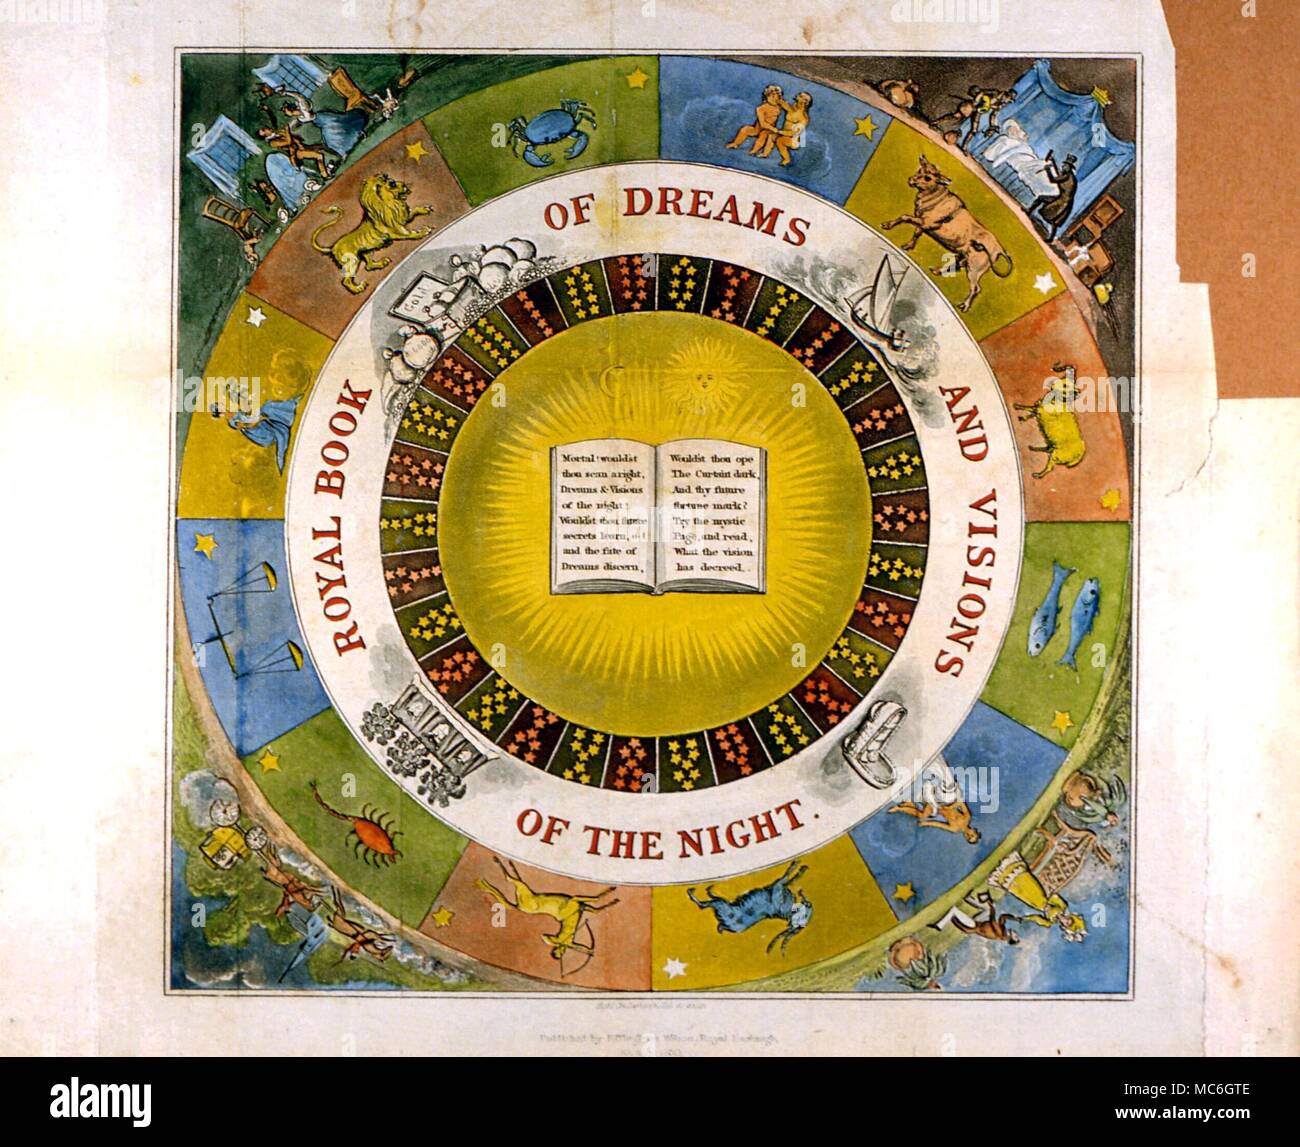 DREAMS - Insert colour plate diagram to illustrate a popular text on dream interpretation. From 'The Royal Book of Dreams'. by 'Raphael', c. 1840. Plate seems to be earlier Stock Photo